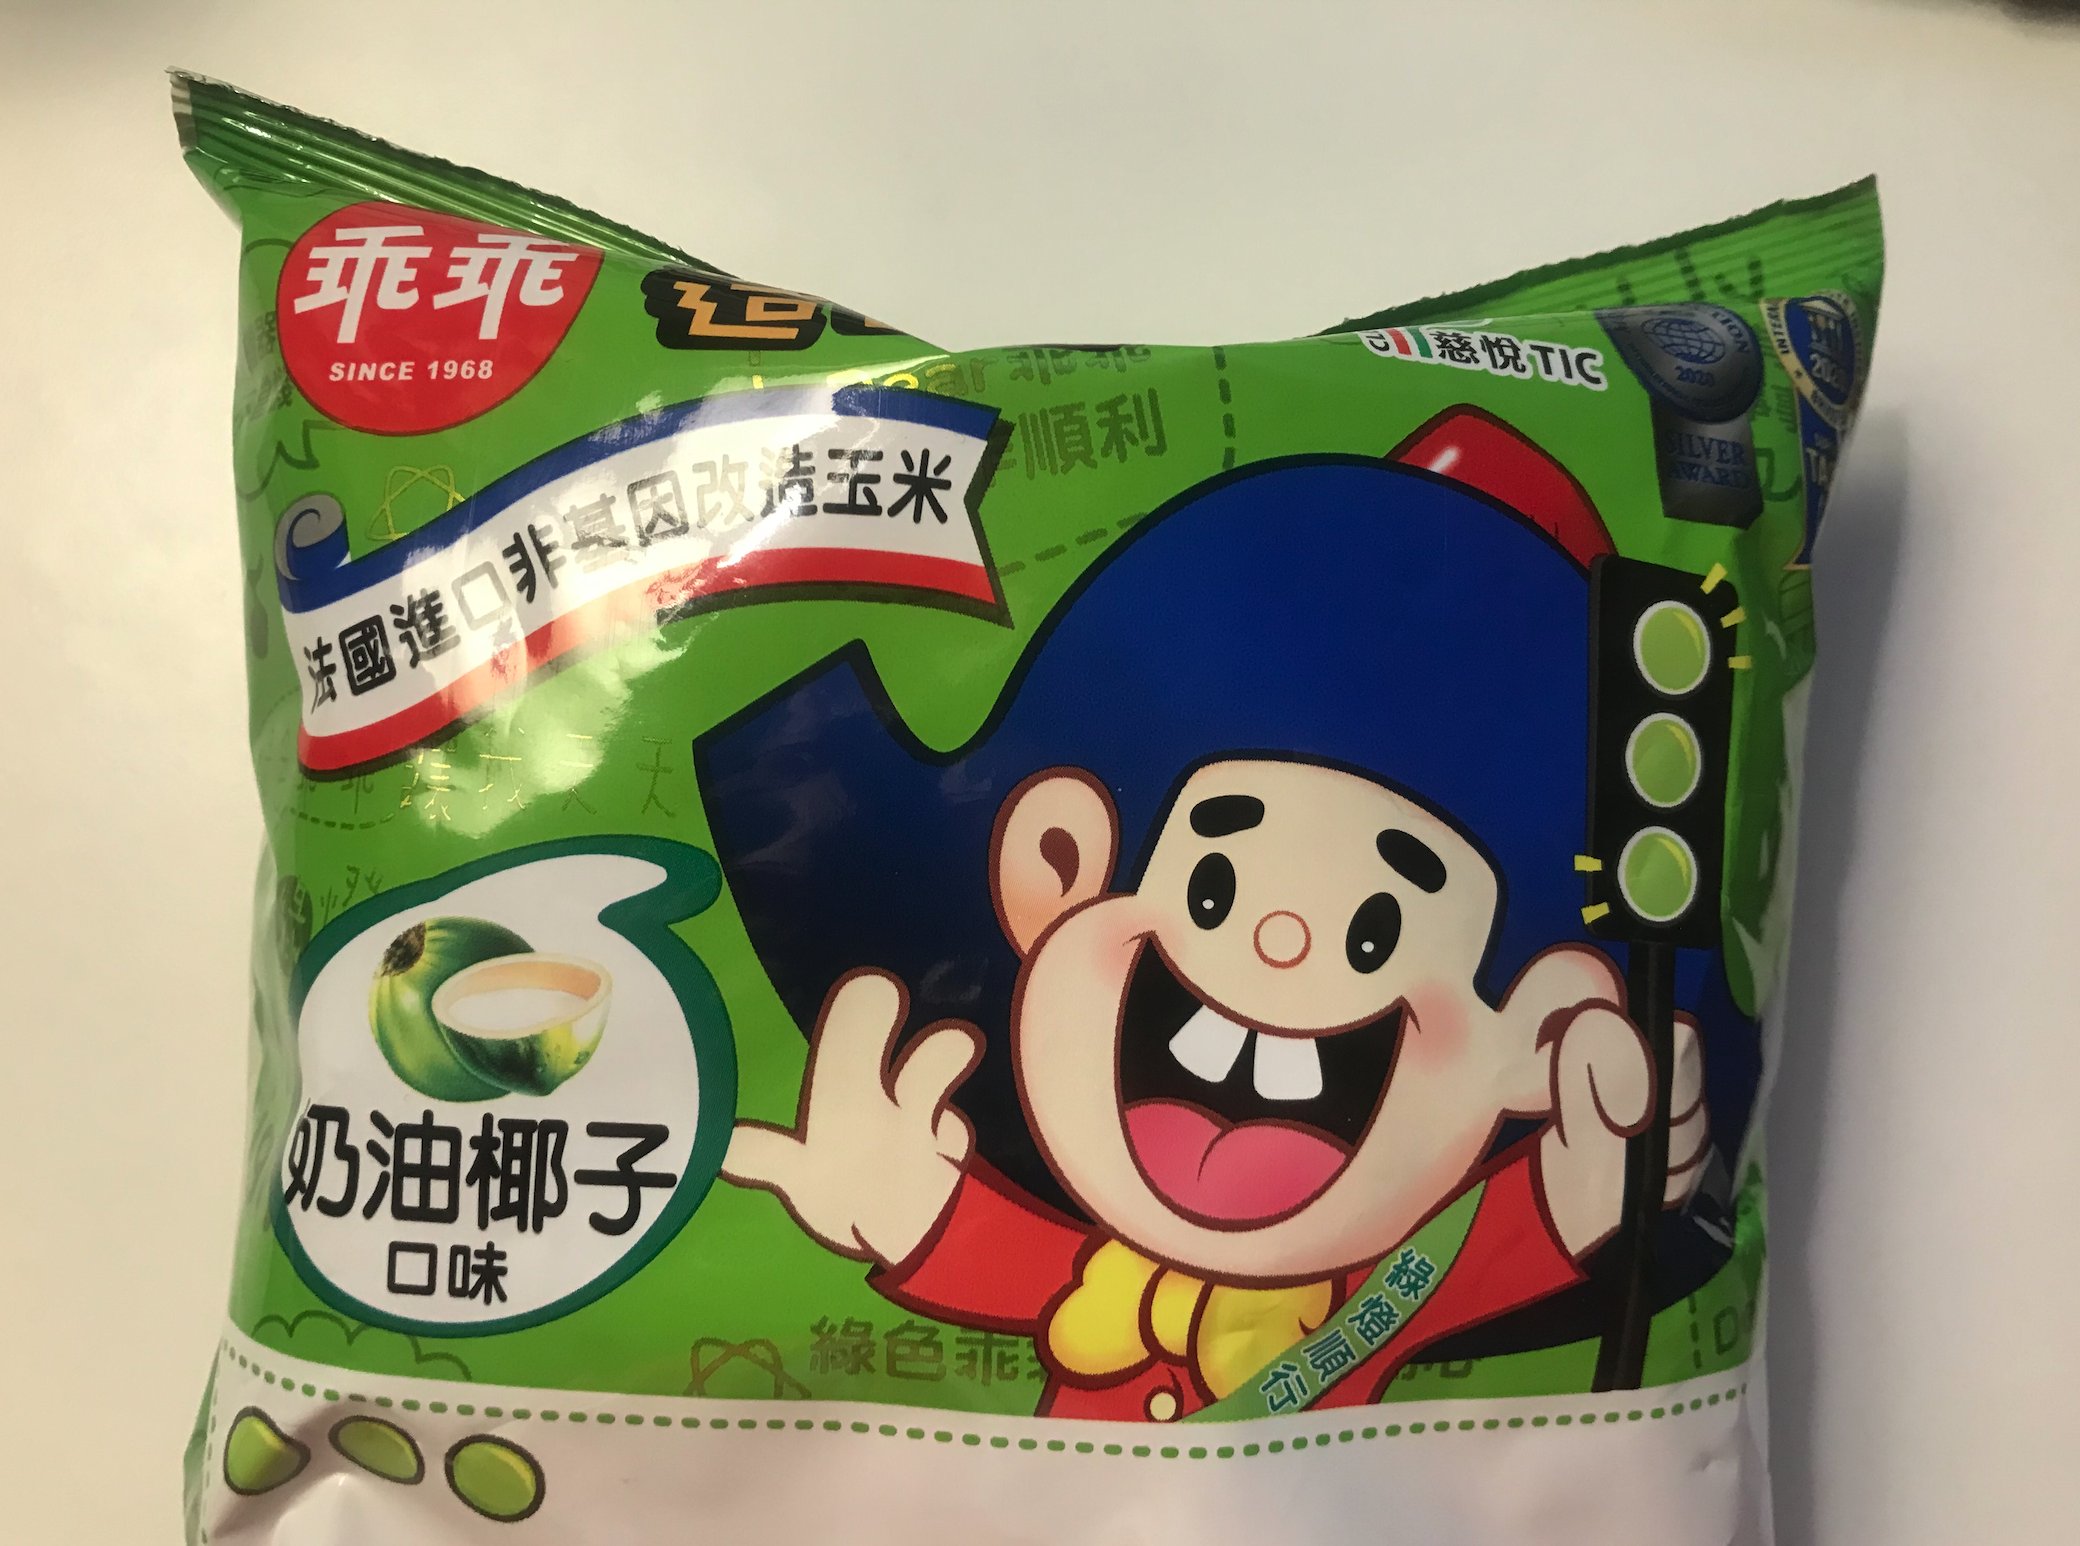 laowai 88888888 on Twitter: "Utterly fascinated by "Kuai Kuai culture" in  Taiwan, where green-colored bags of the snack brand Kuai Kuai (乖乖) are  placed on or near computers/machines because it is believed this can help stop the device from breaking down.